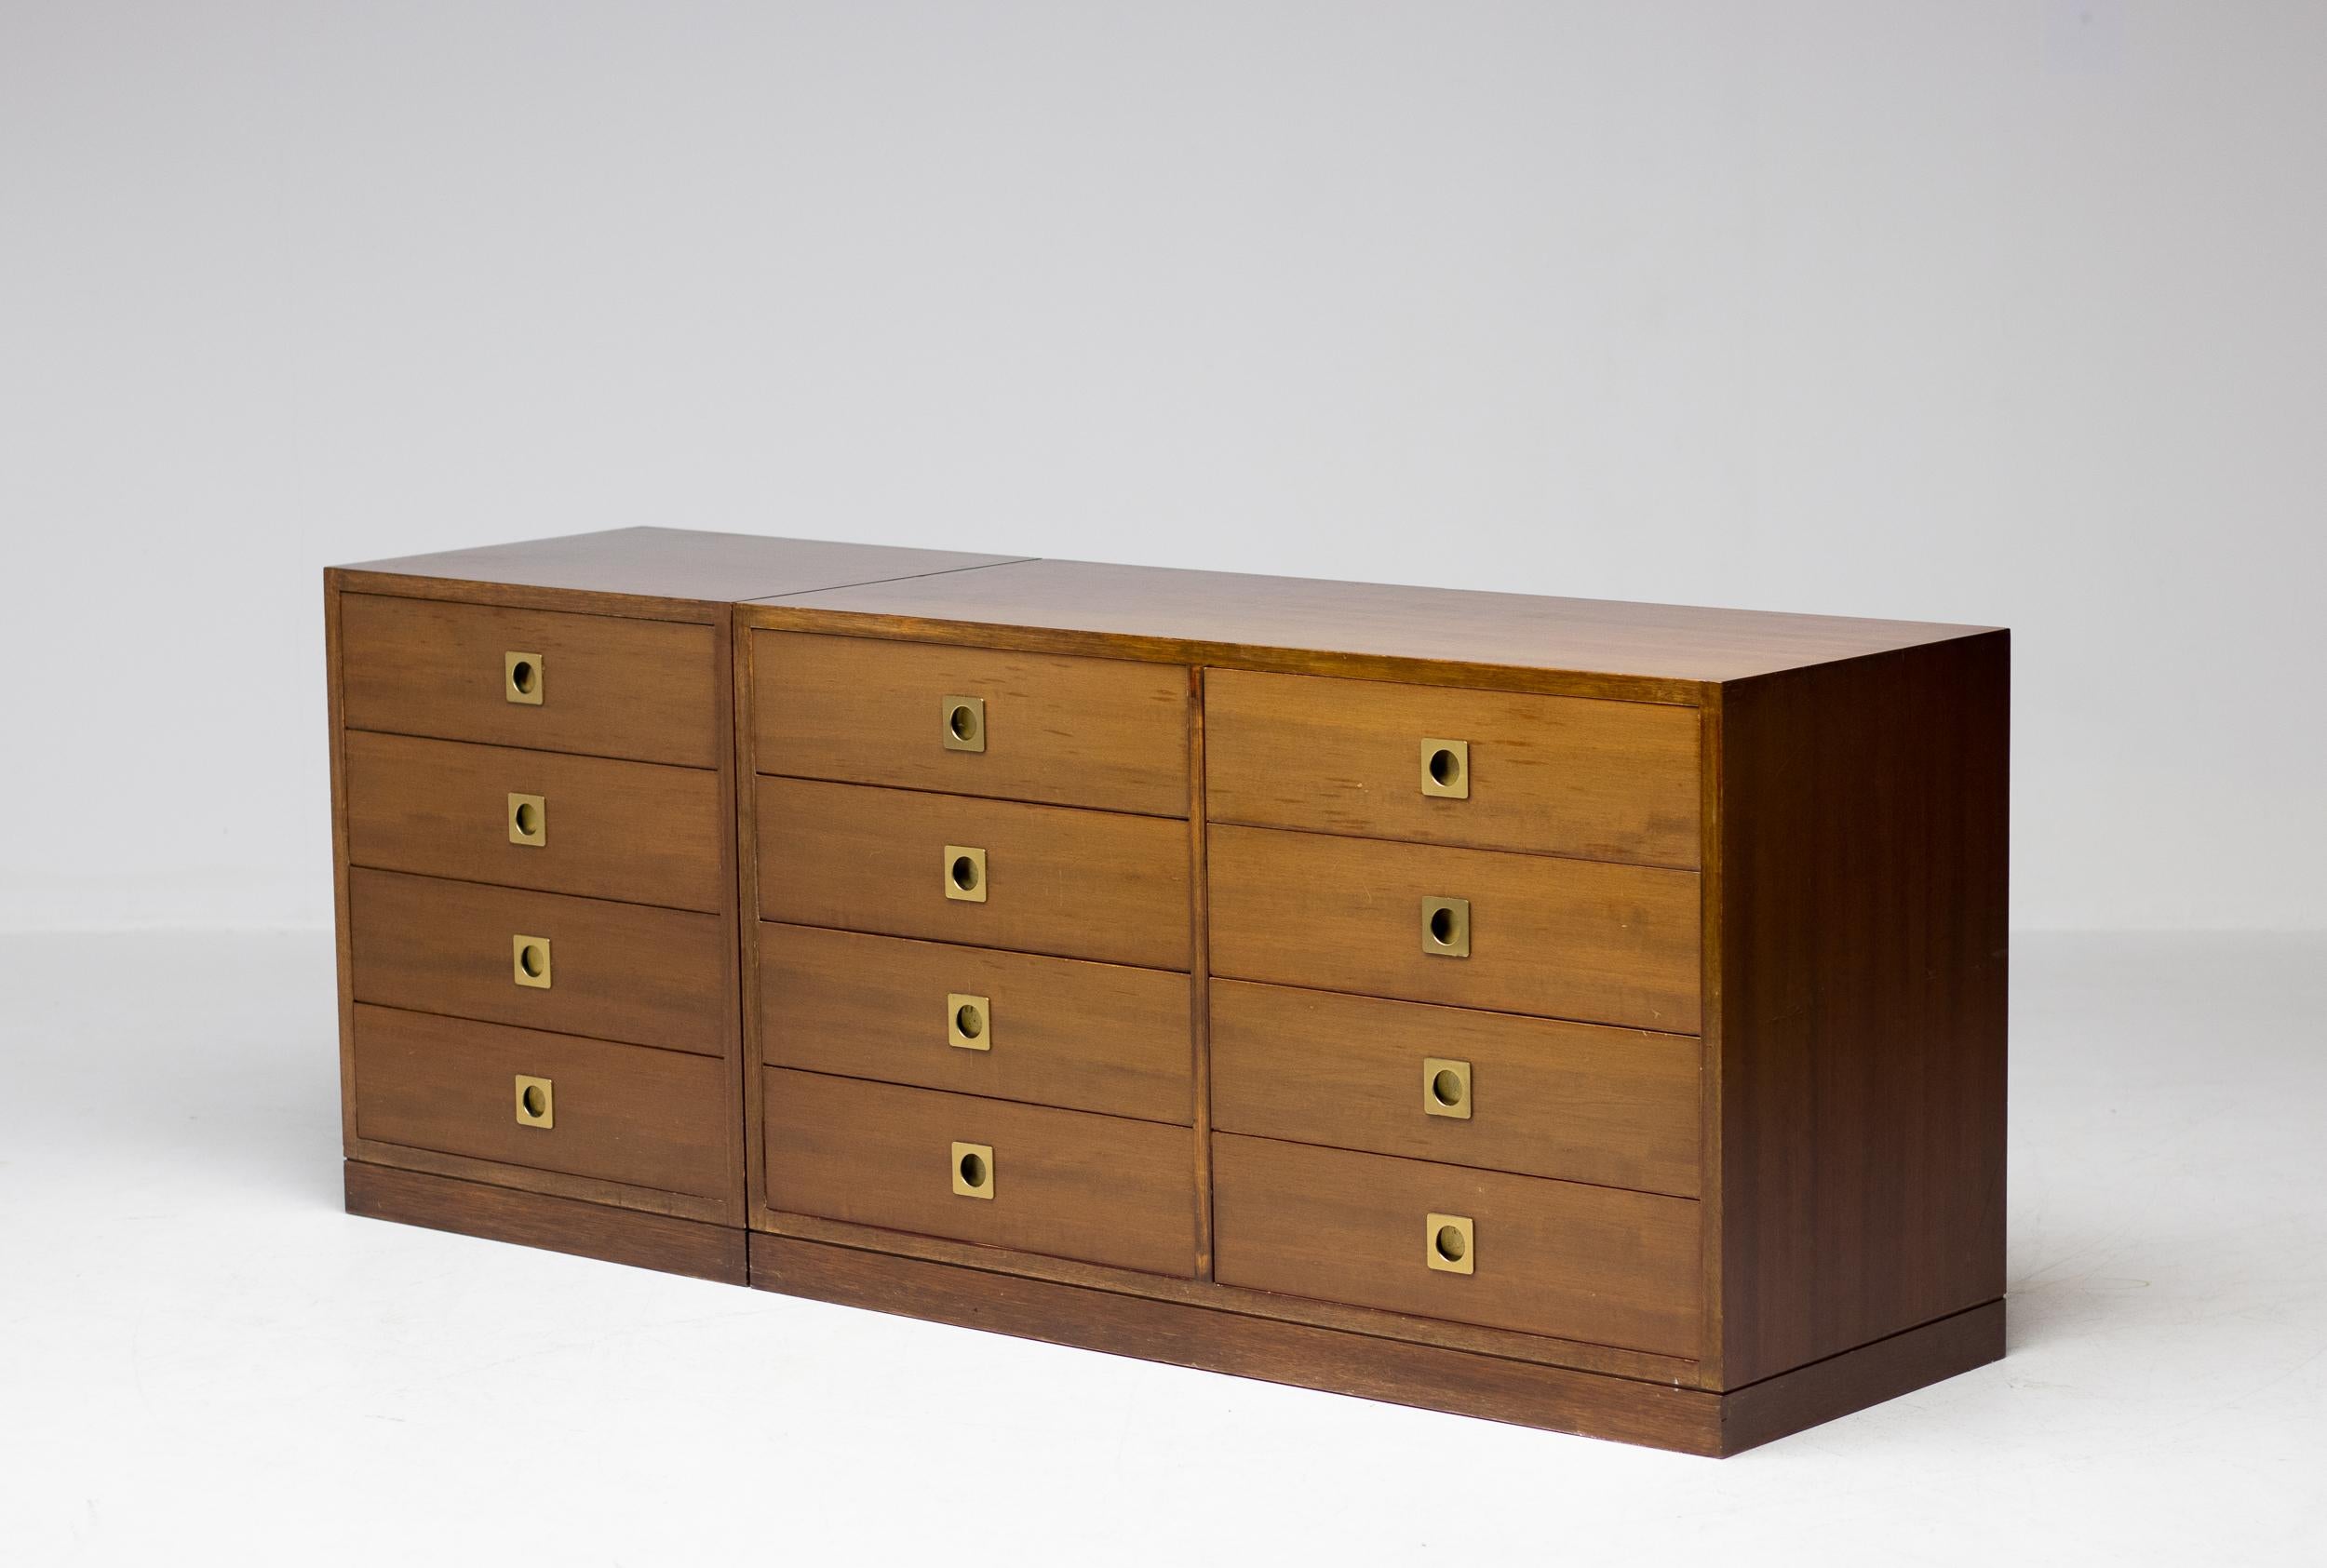 Italian modernist matching pair of walnut and brass chests or drawers attributed to Ico Parisi, manufactured by Spartaco Brugnoli. Refined design with inlaid brass pulls to open the 12 generous size drawers. 
The set is very versatile in use, the